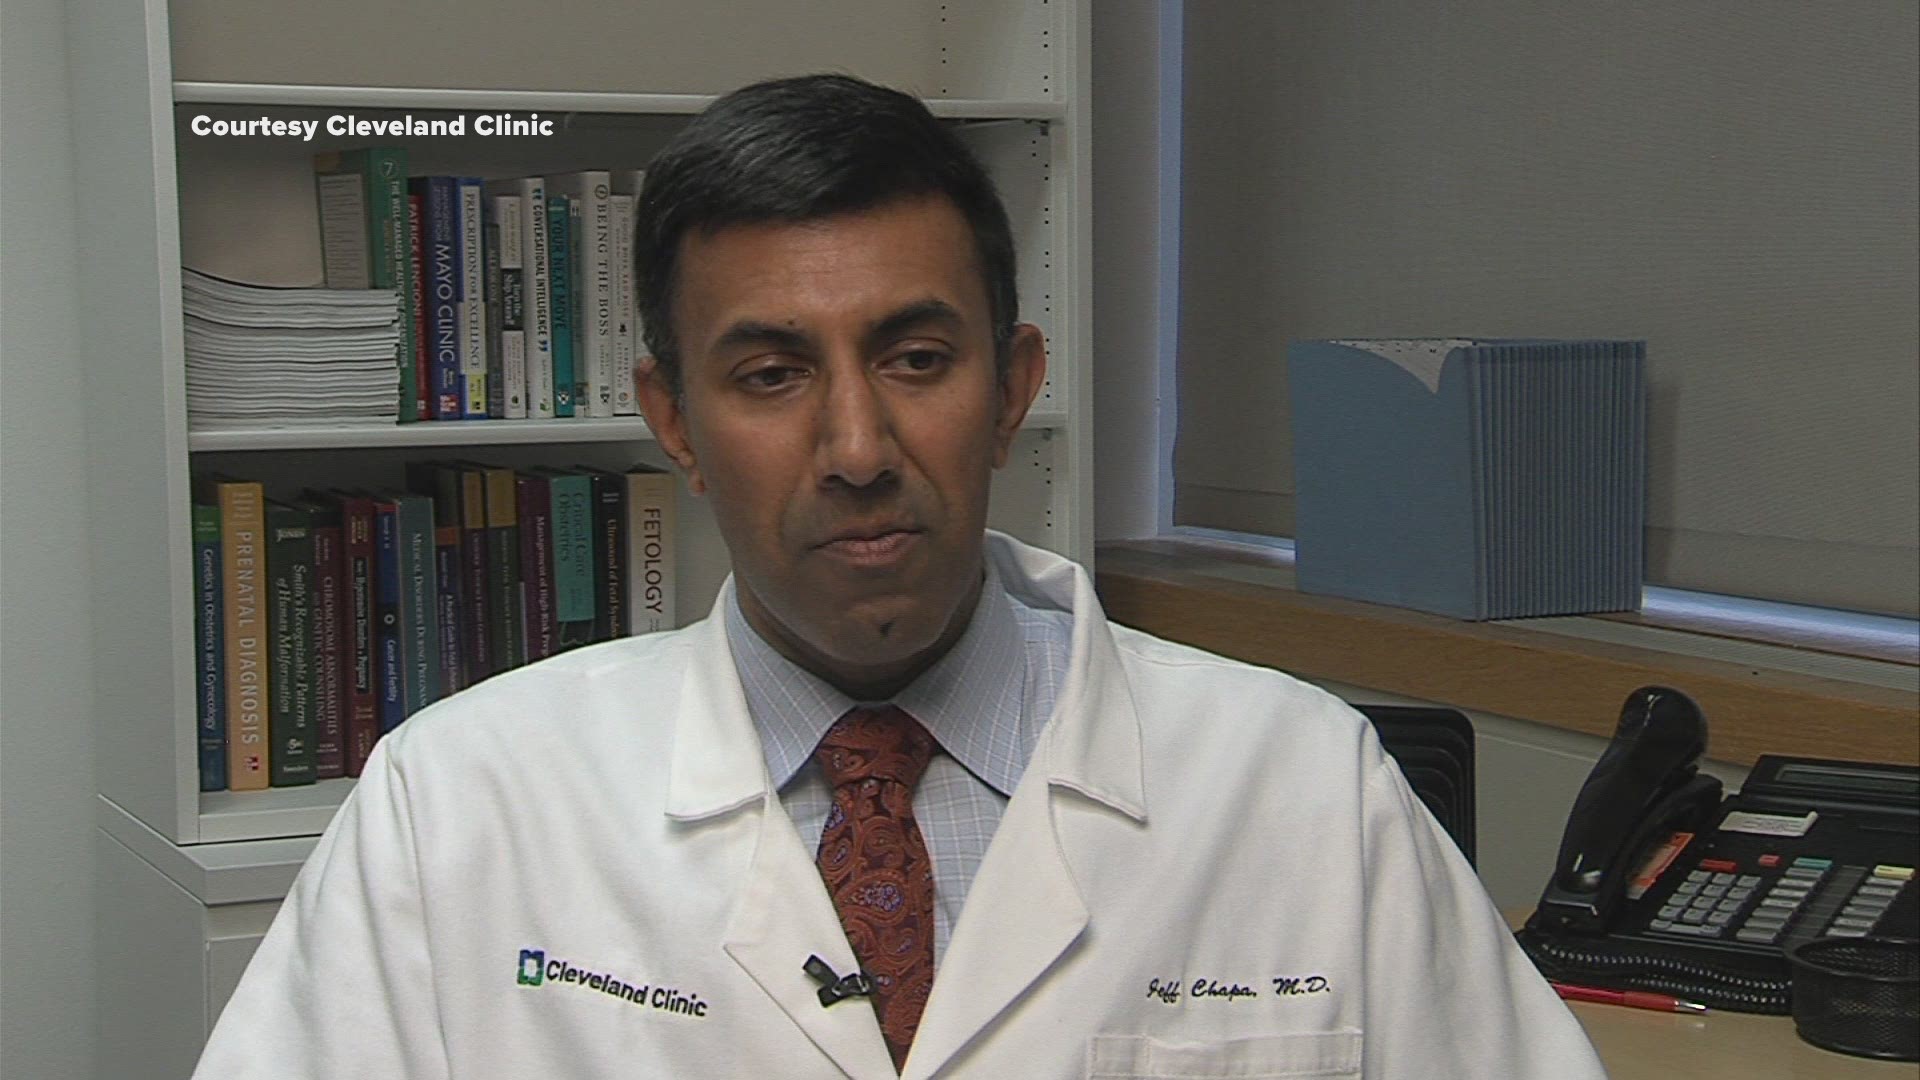 Dr. Jeffrey Chapa discusses Cleveland Clinic research that shows the risks of flu in pregnant women.